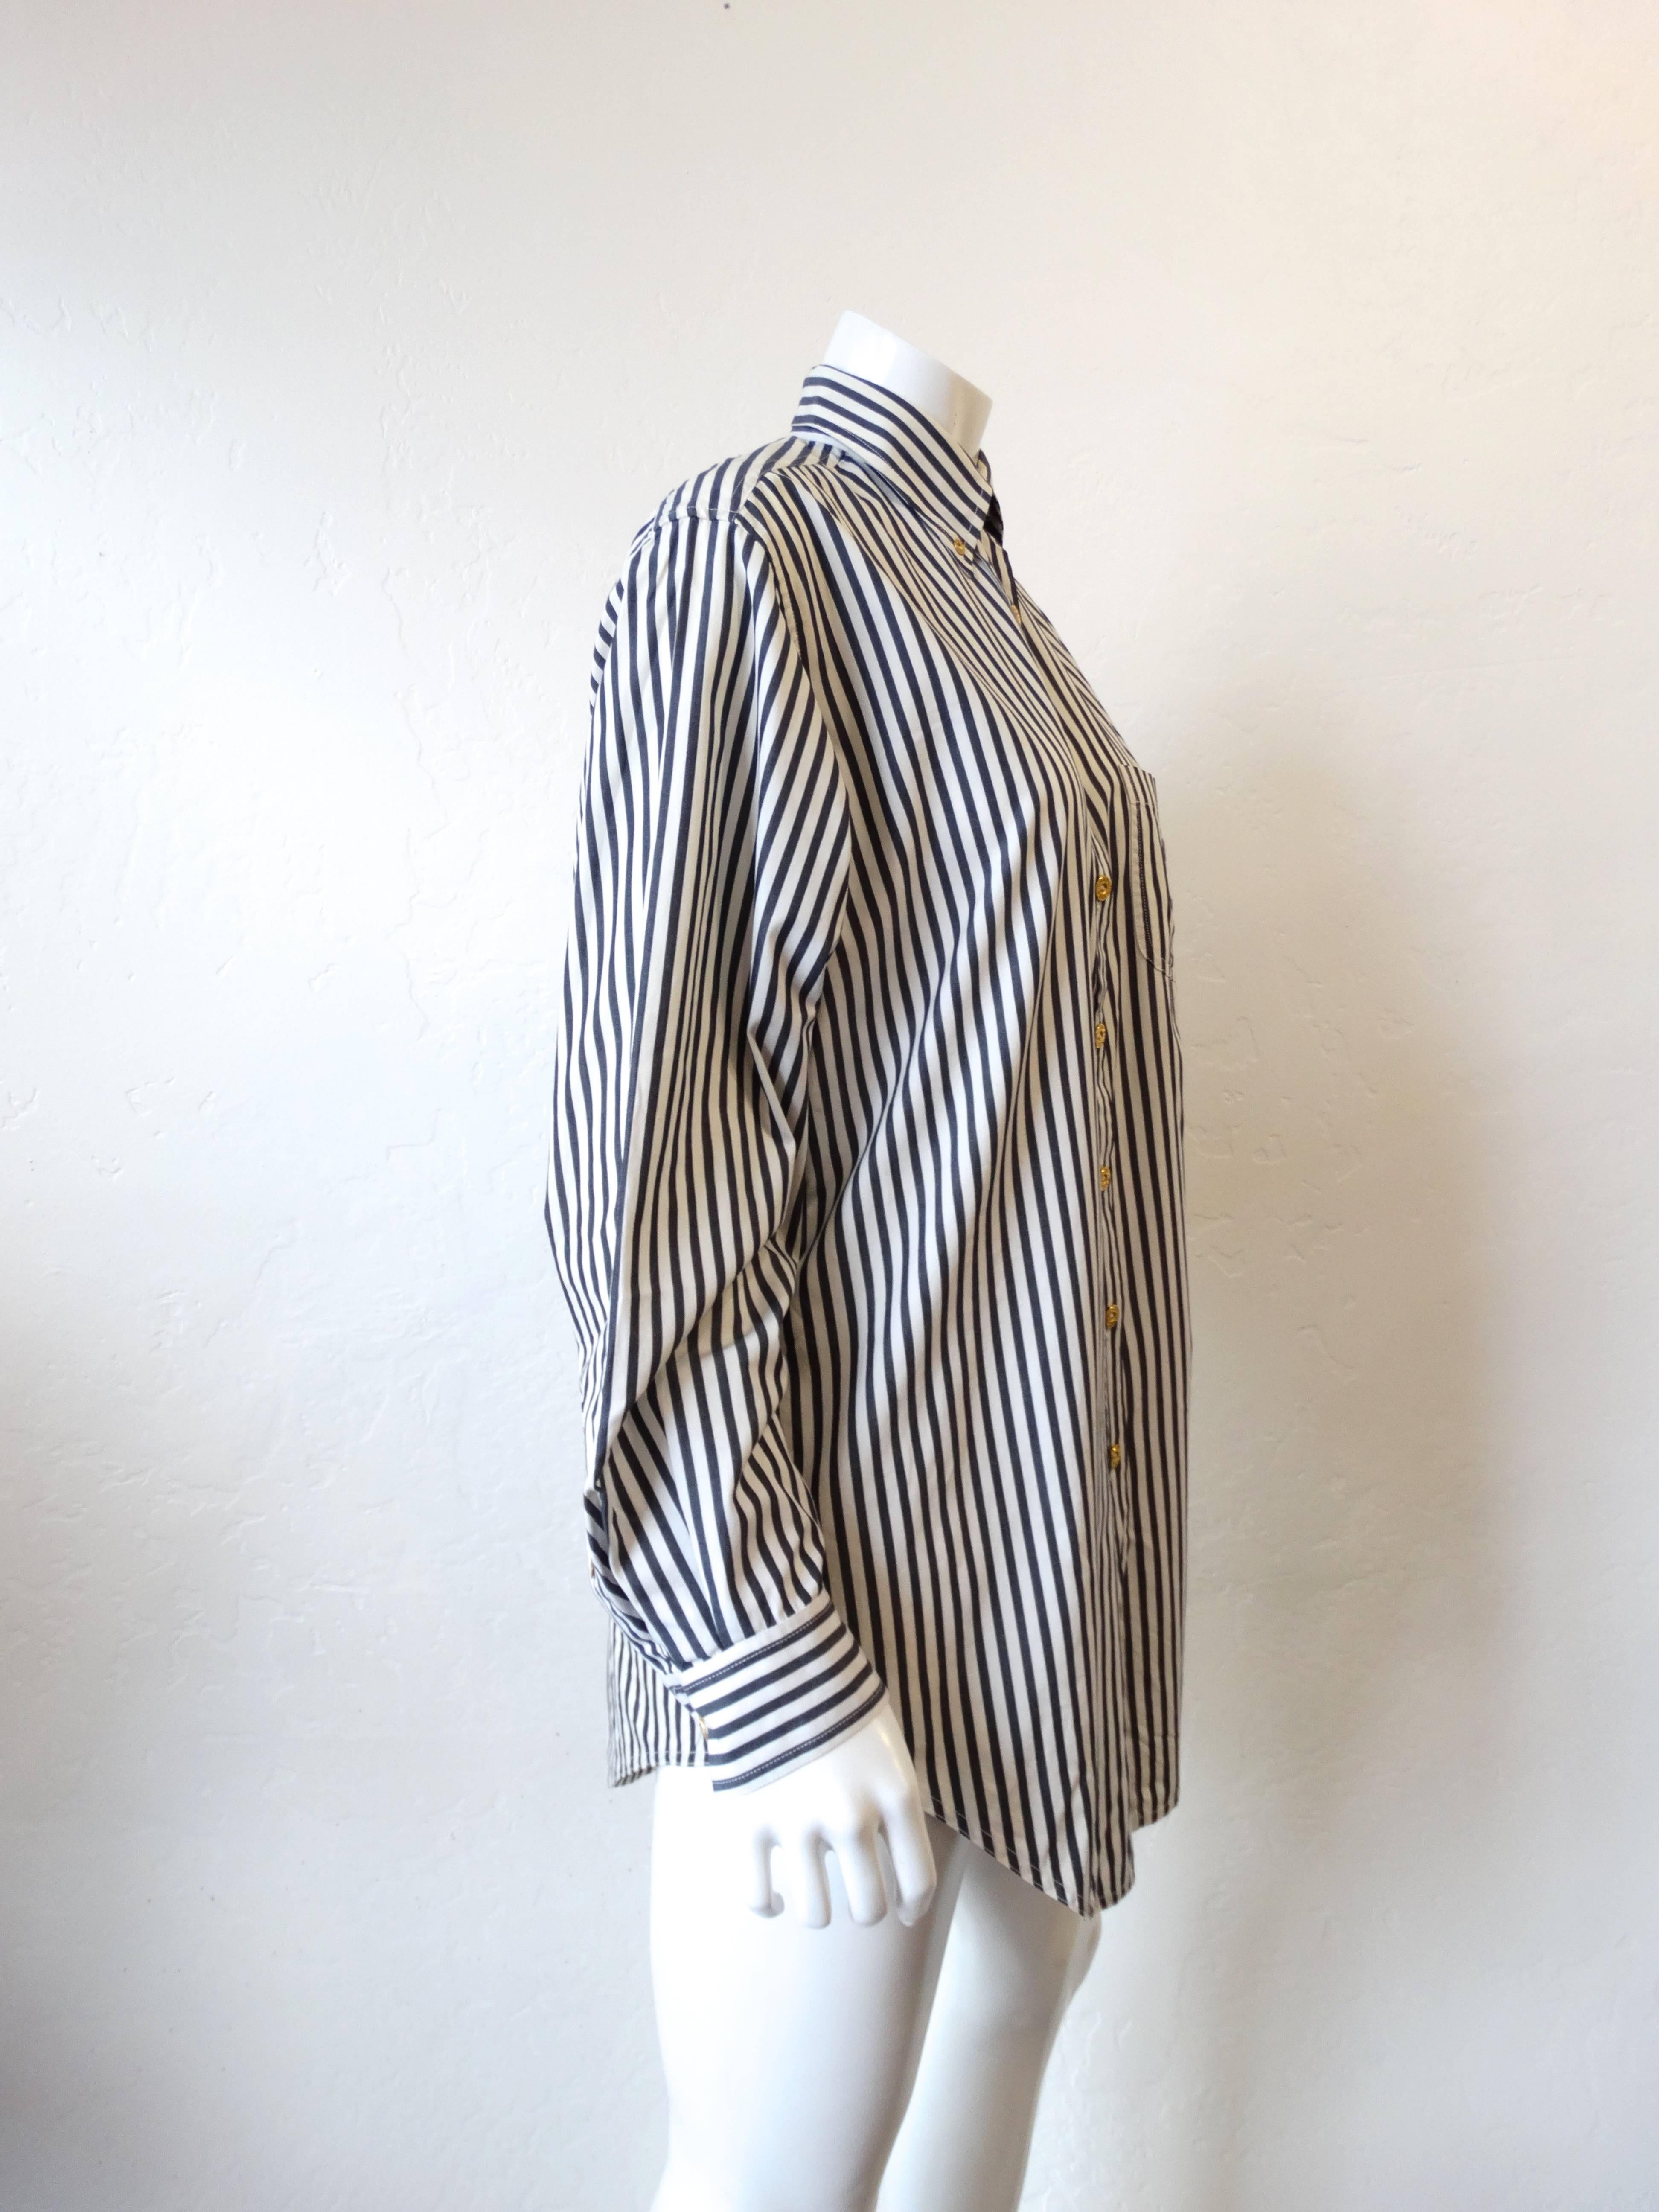 Rock the resurgence of the logo trend in this 1990s Chanel Button Up! Grey and white striped print on cotton fabric. Embroidered CC logo at the breast pocket in deep grey. Gold Chanel embossed buttons up the front and on the wrists. Wear as a dress